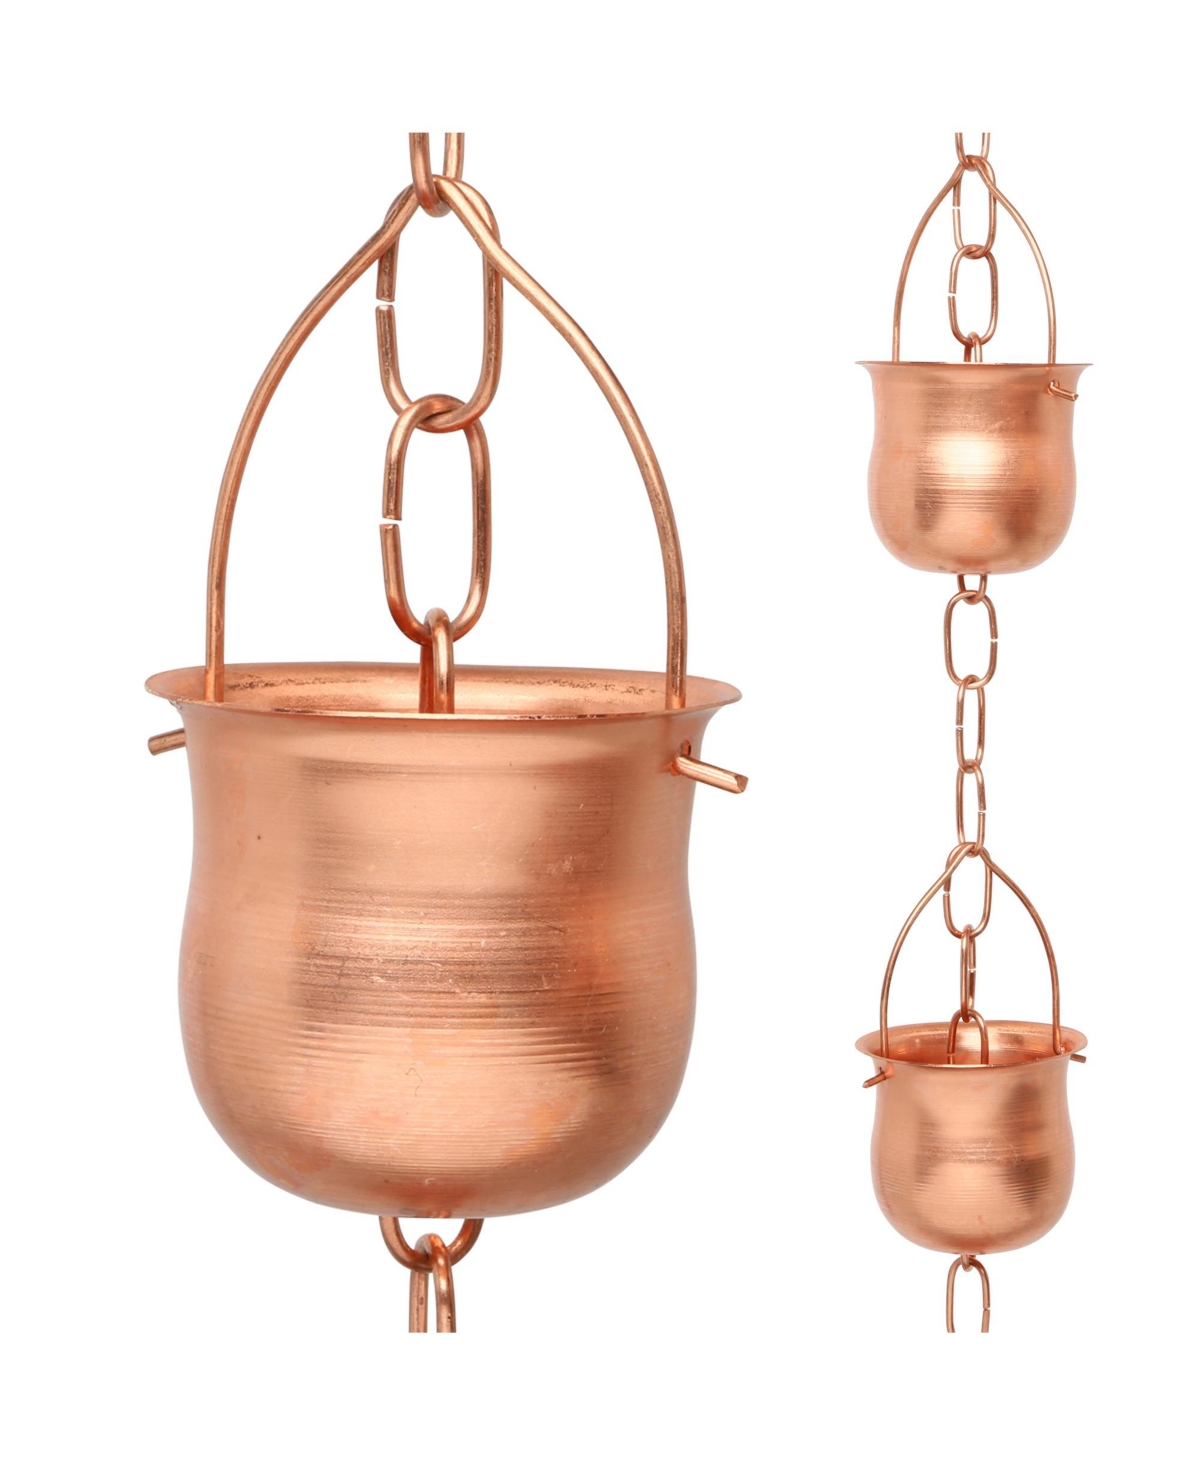 Copper Rain Chain with Pot Style Cups for Gutter Downspout Replacement - Copper